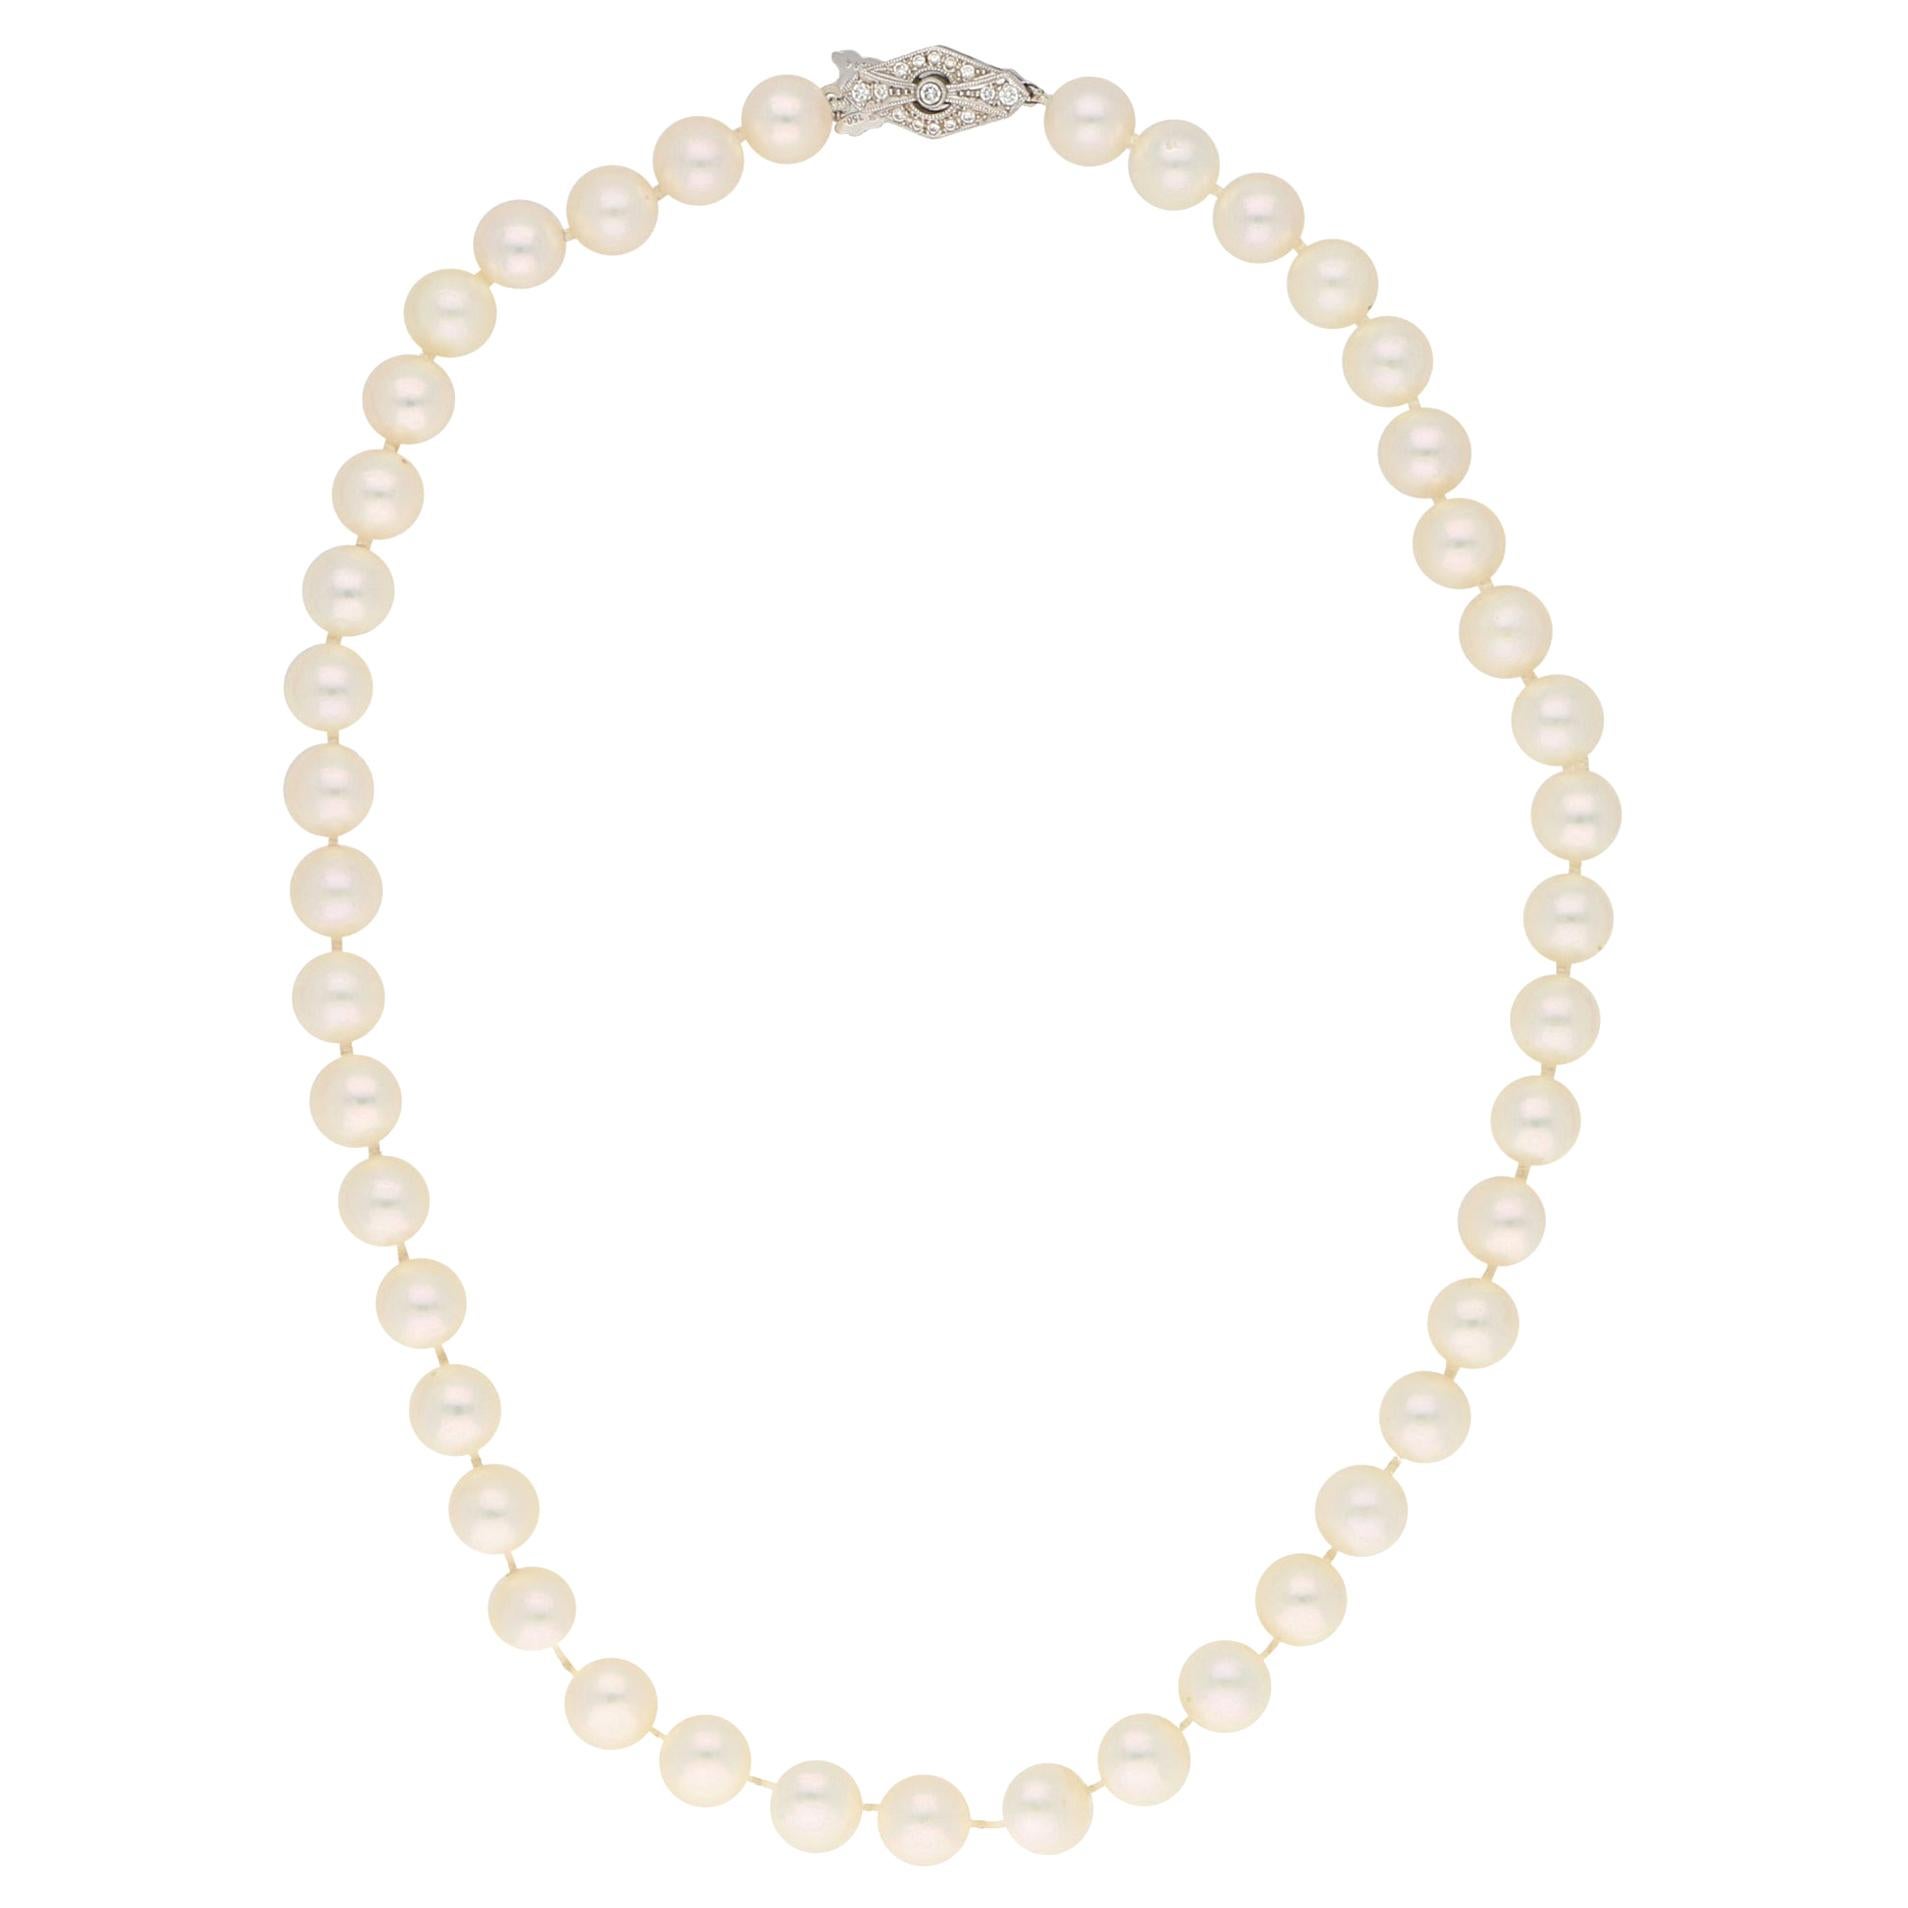 Mikimoto Akoya Cultured Pearl Necklace with a Diamond 18k White Gold Clasp